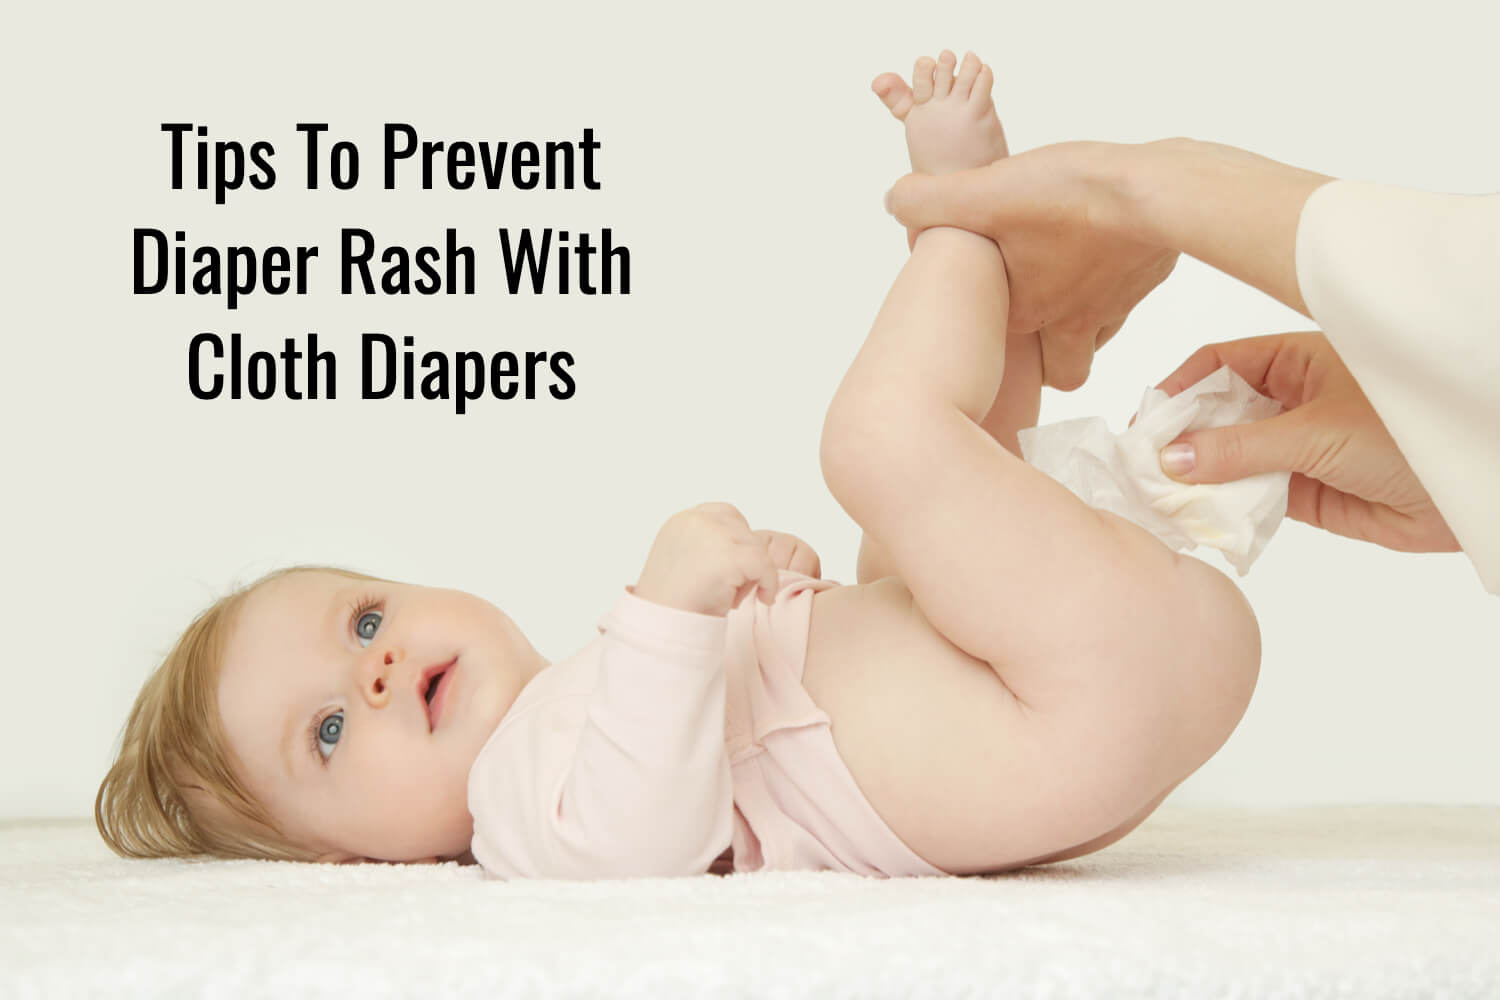 Top 10 Tips To Prevent Diaper Rash With Cloth Diapers